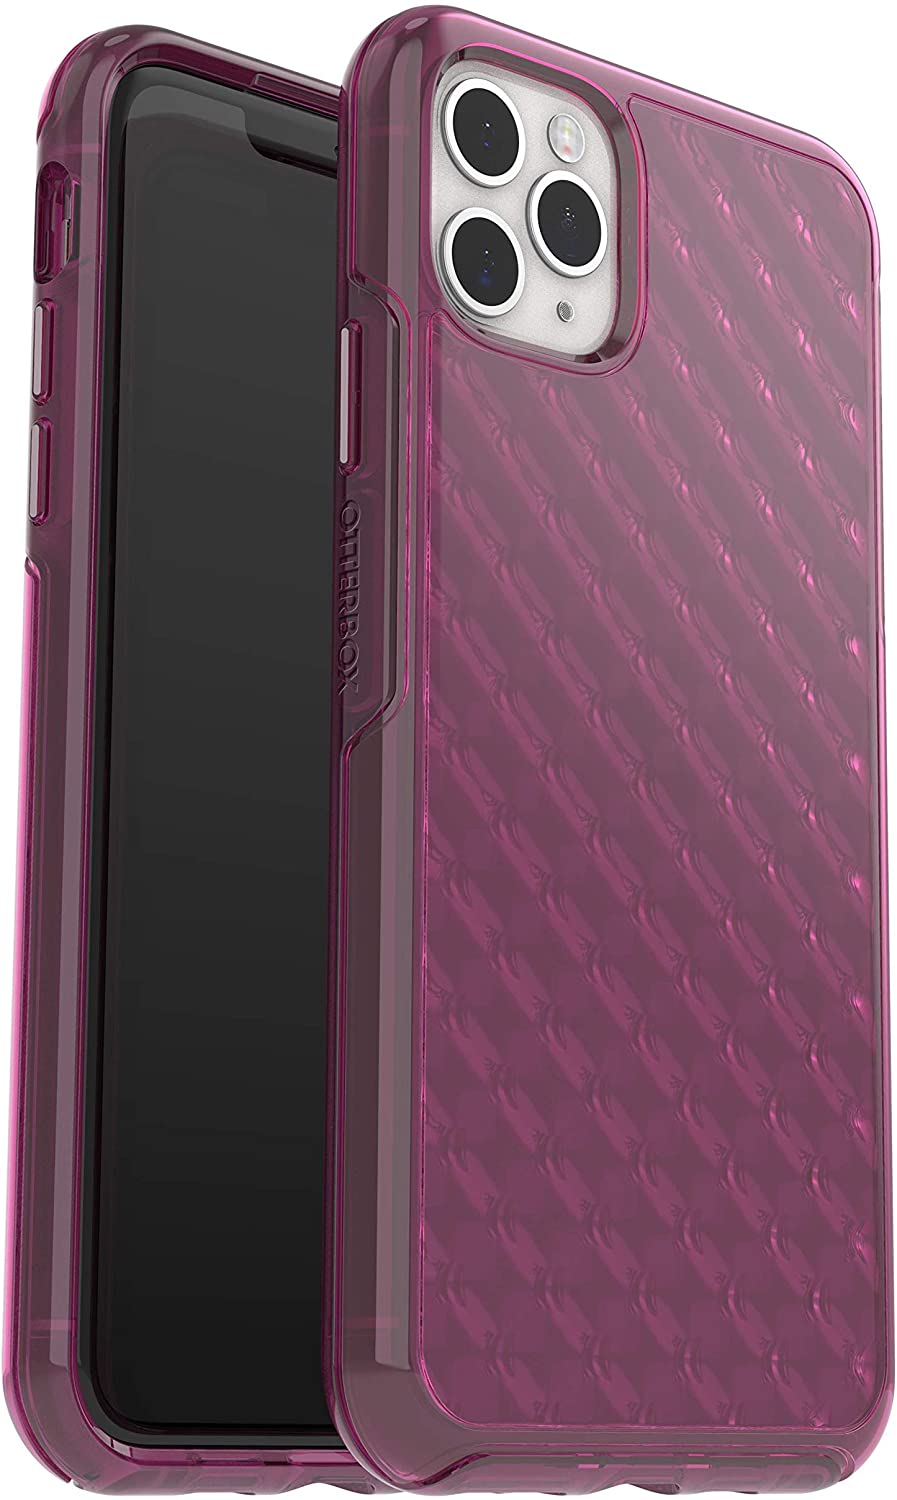 OtterBox VUE SERIES Case for Apple iPhone 11 Pro Max - Plum Crazy (New)